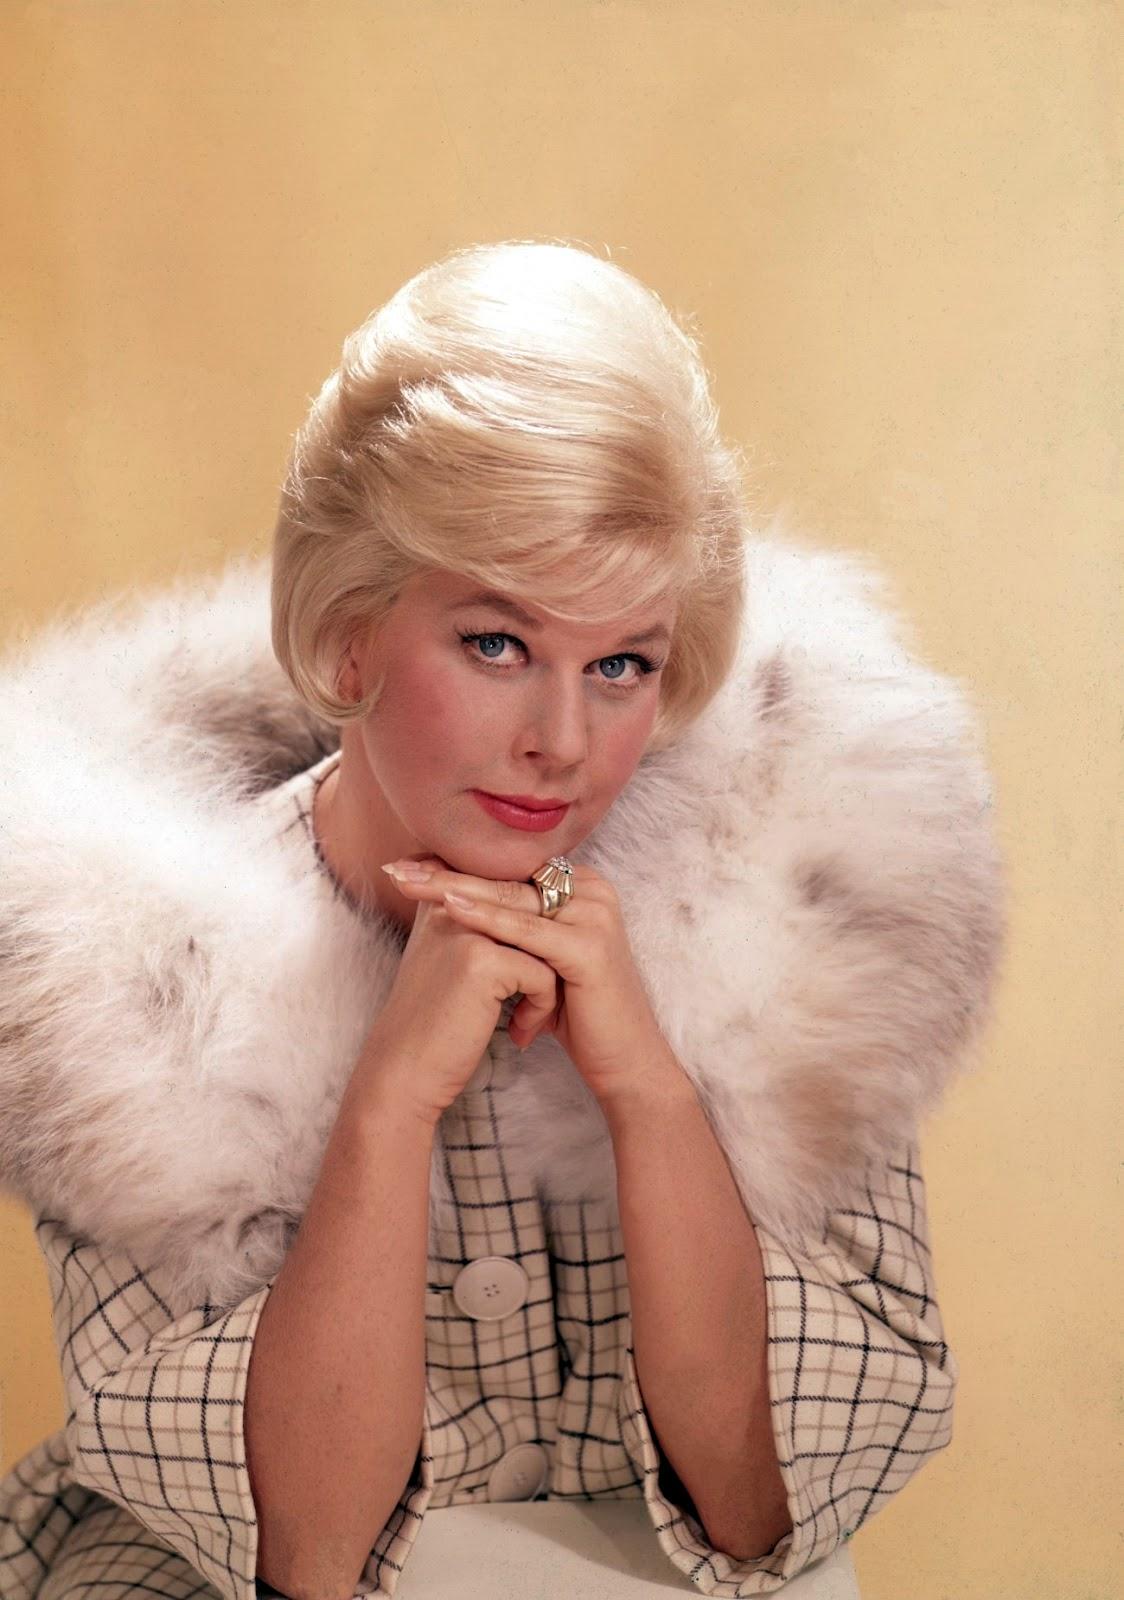 Theory Thursday: Dig It, Where is Doris Day? ⋆ And the Underdog Wins